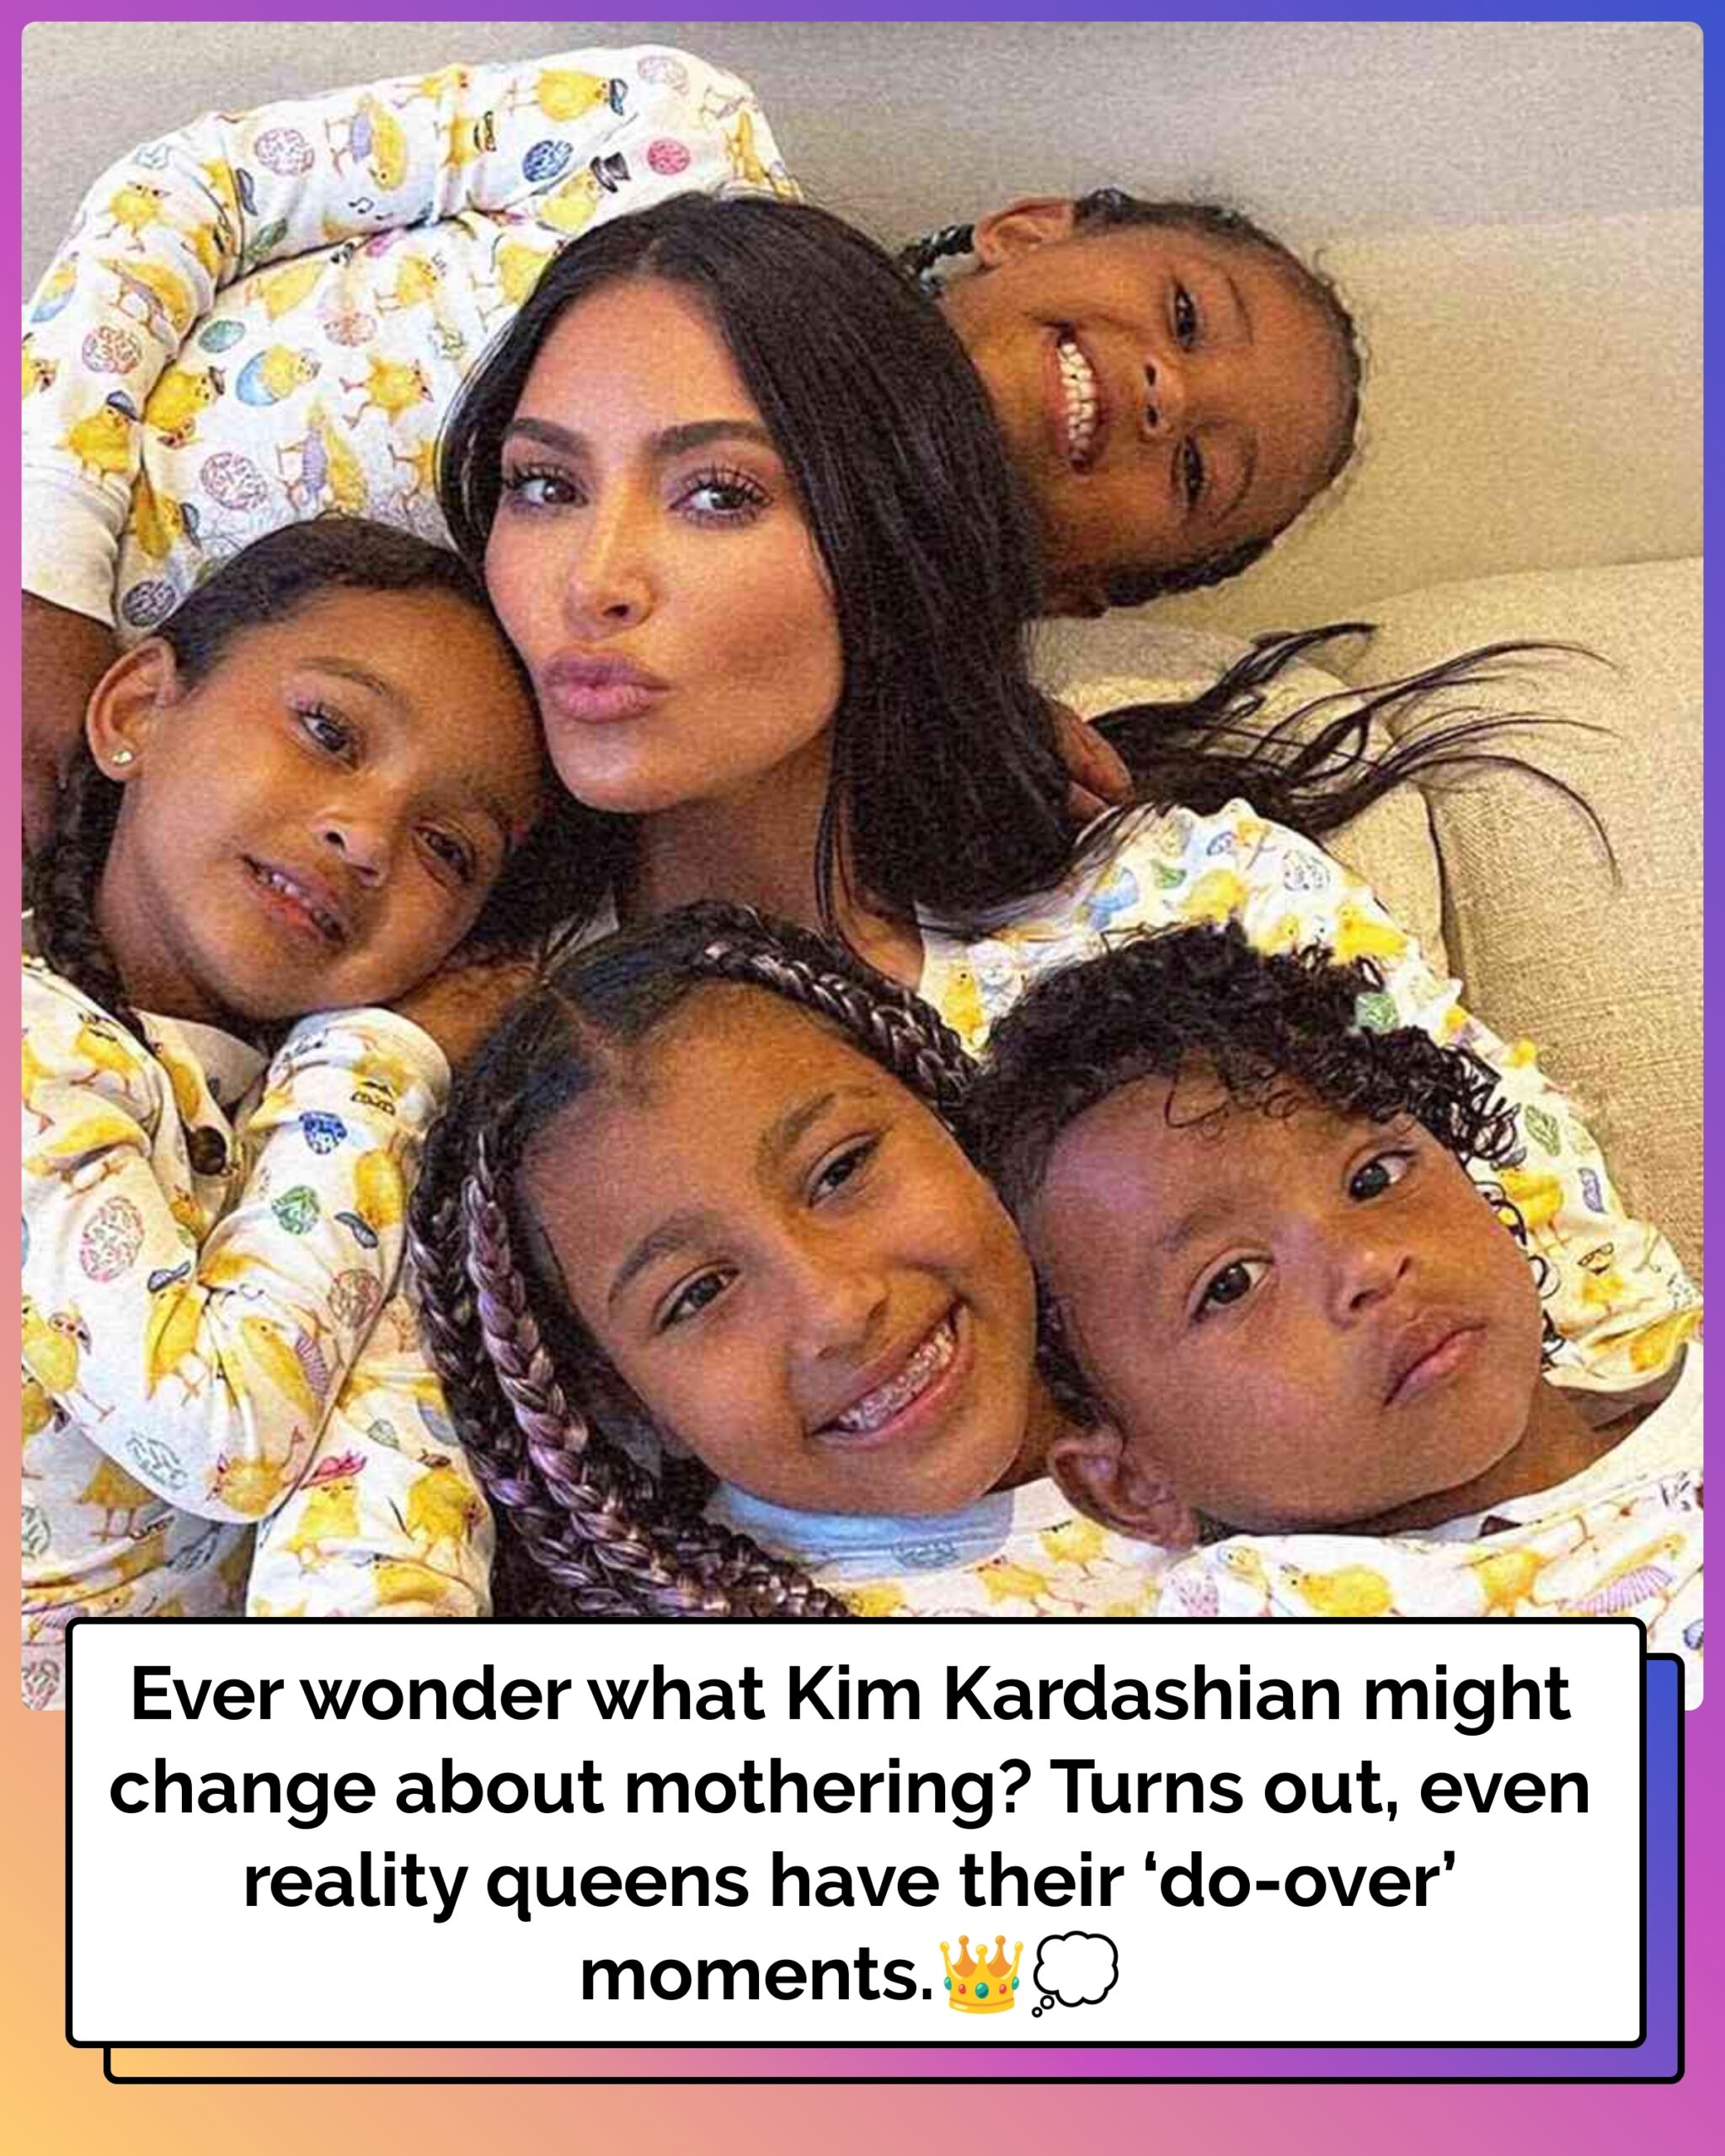 Kim Kardashian Reveals the One Thing She’d Do Over as a Mom If She Could